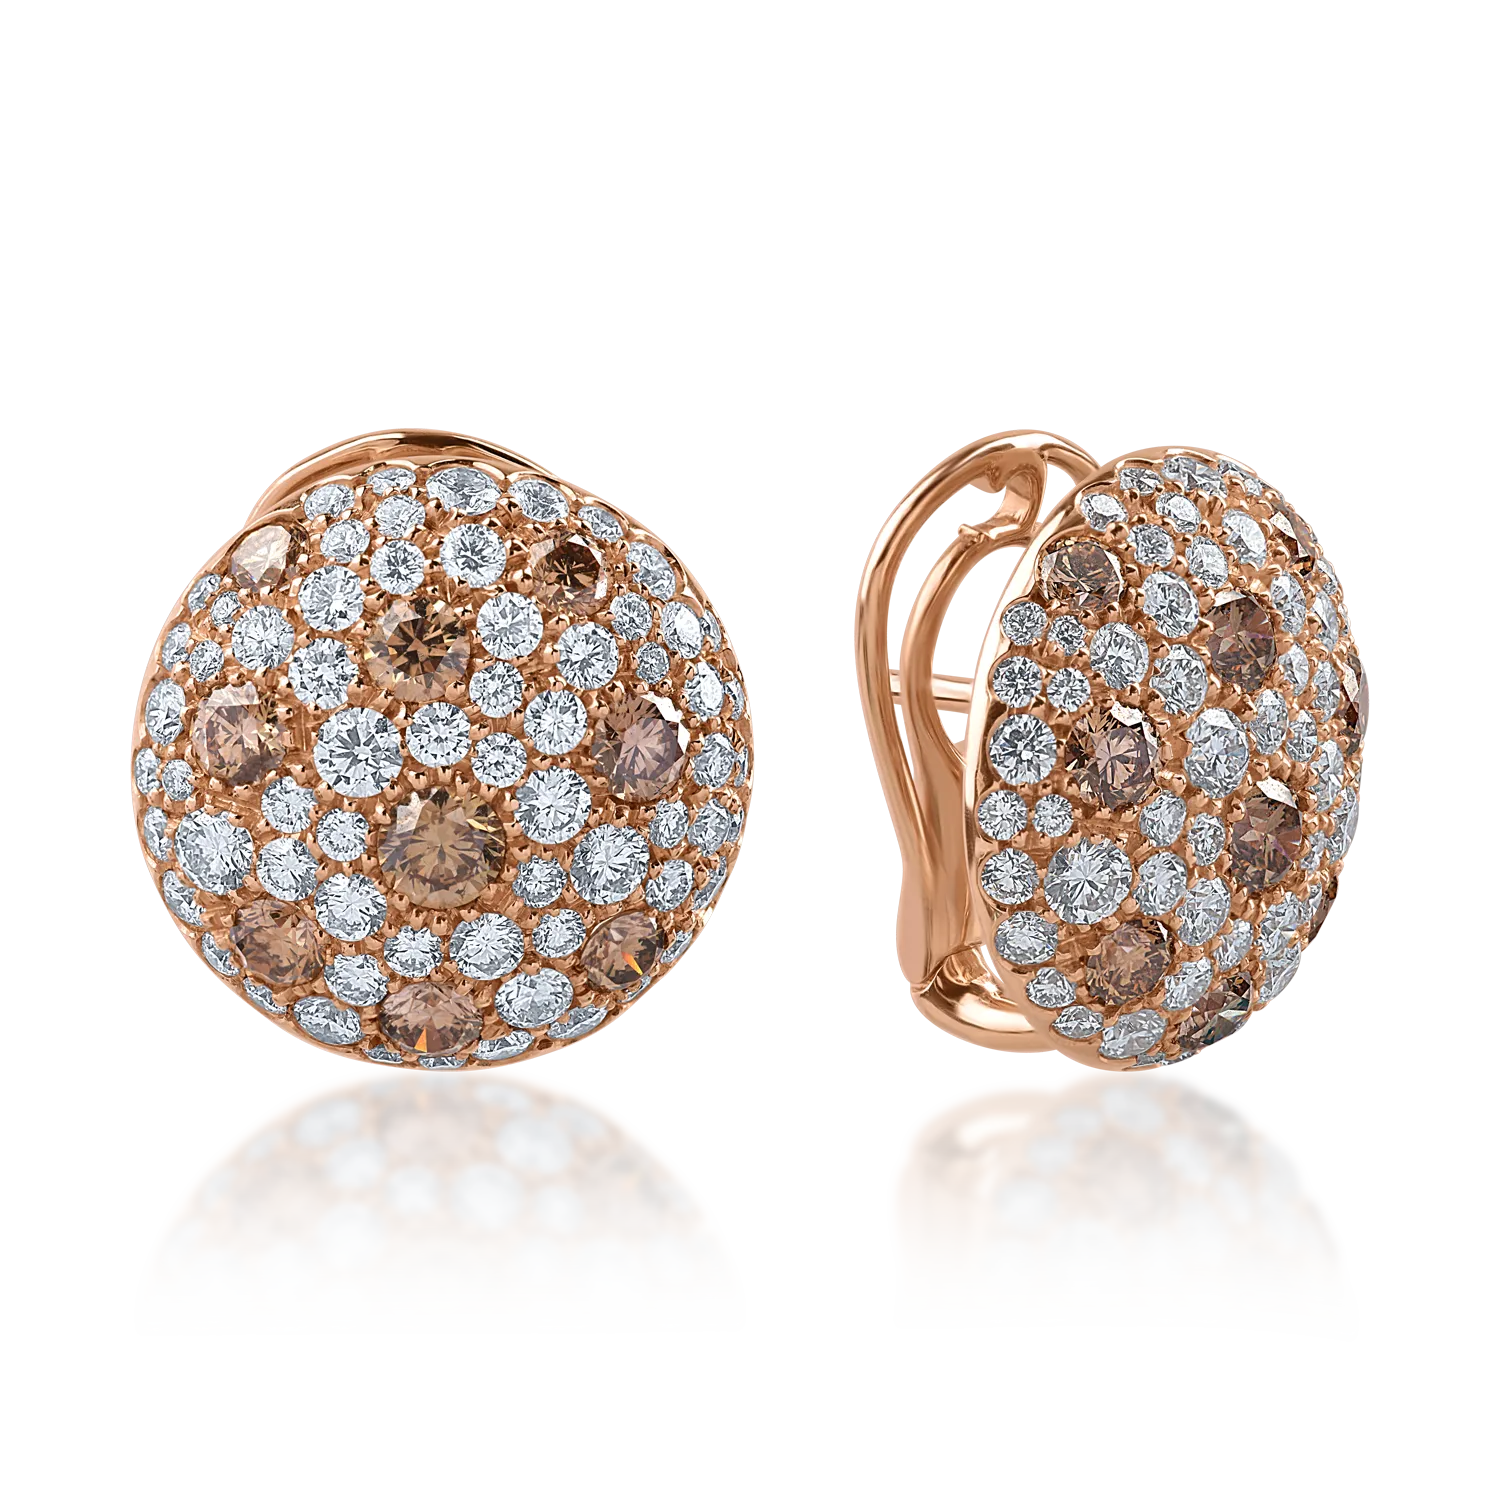 Rose gold earrings with 1.87ct brown diamonds and 2.72ct clear diamonds